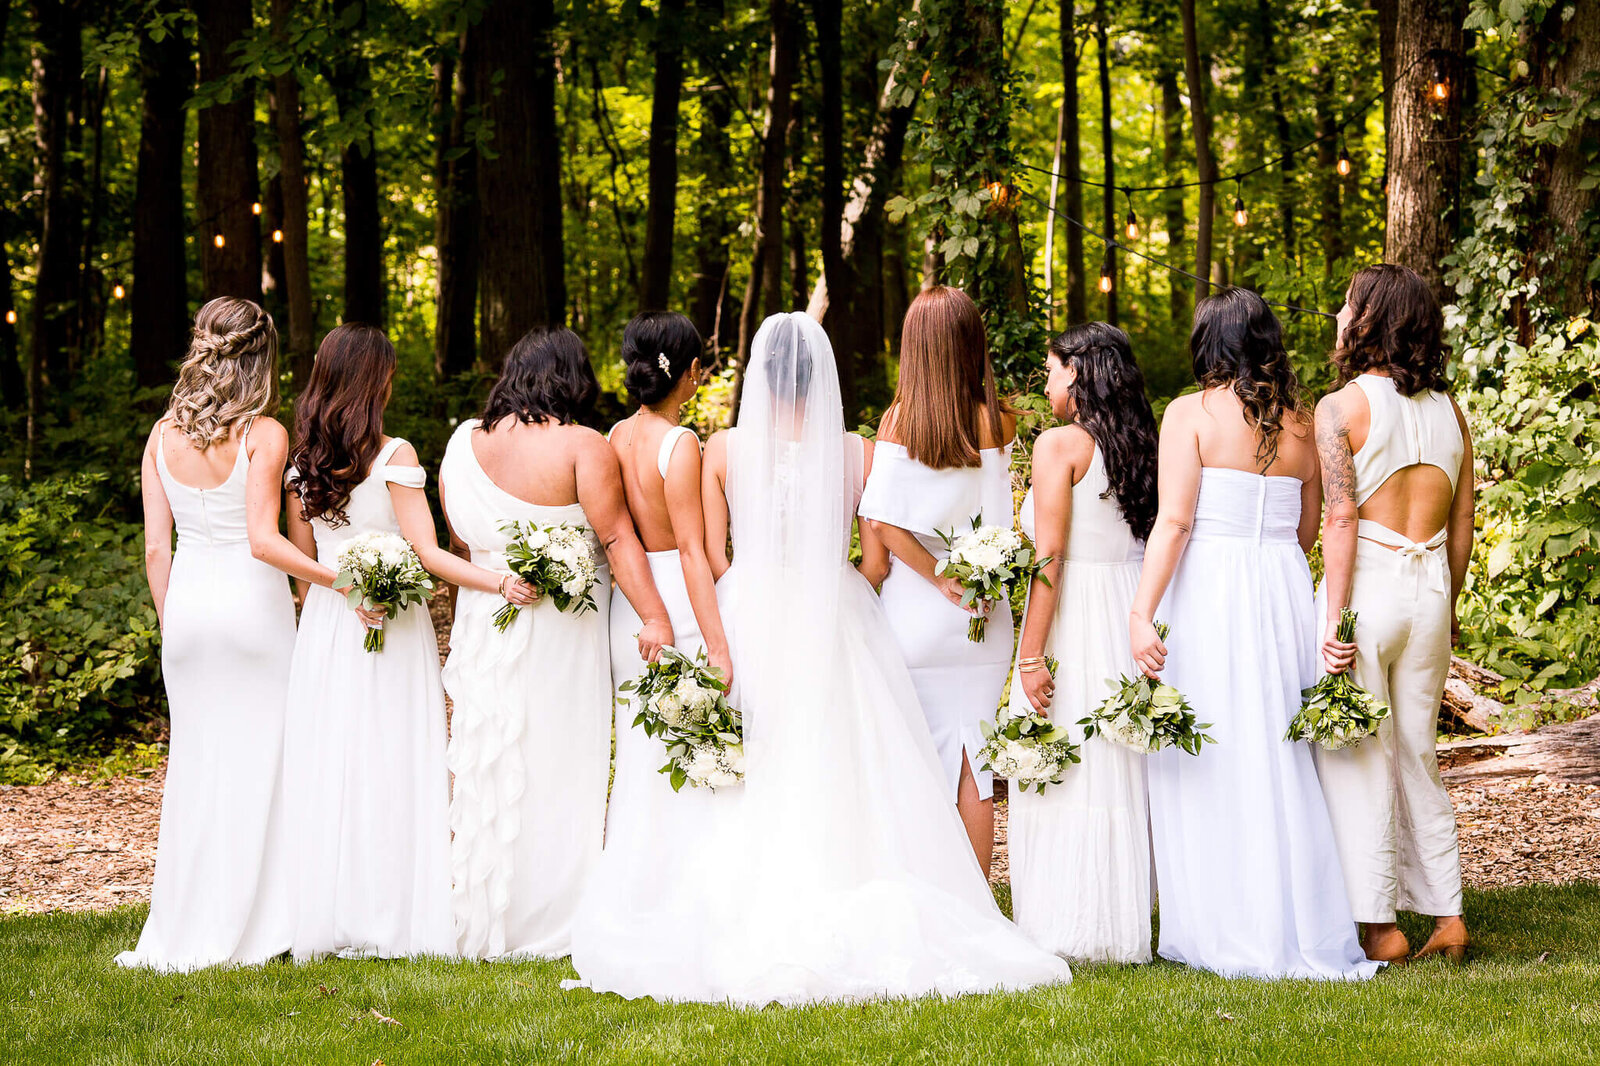 Bride with bridesmaids in white dresses.